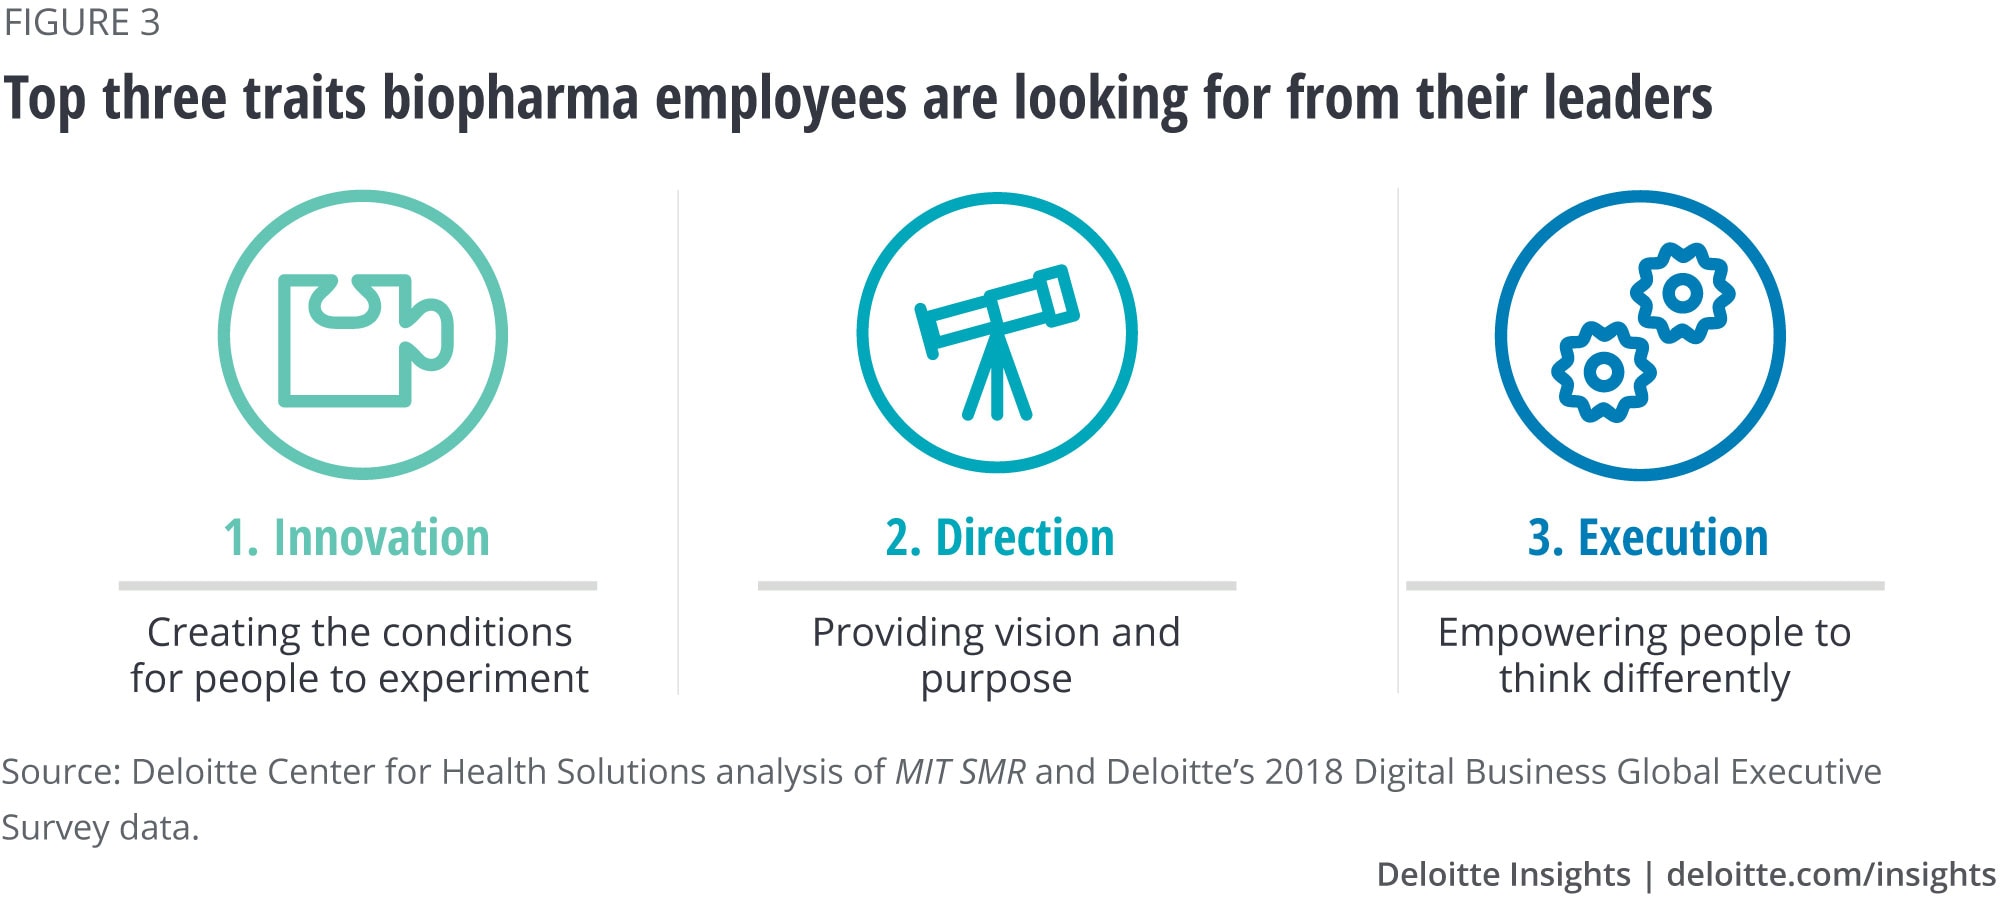 Top three traits biopharma employees are looking for from their leaders